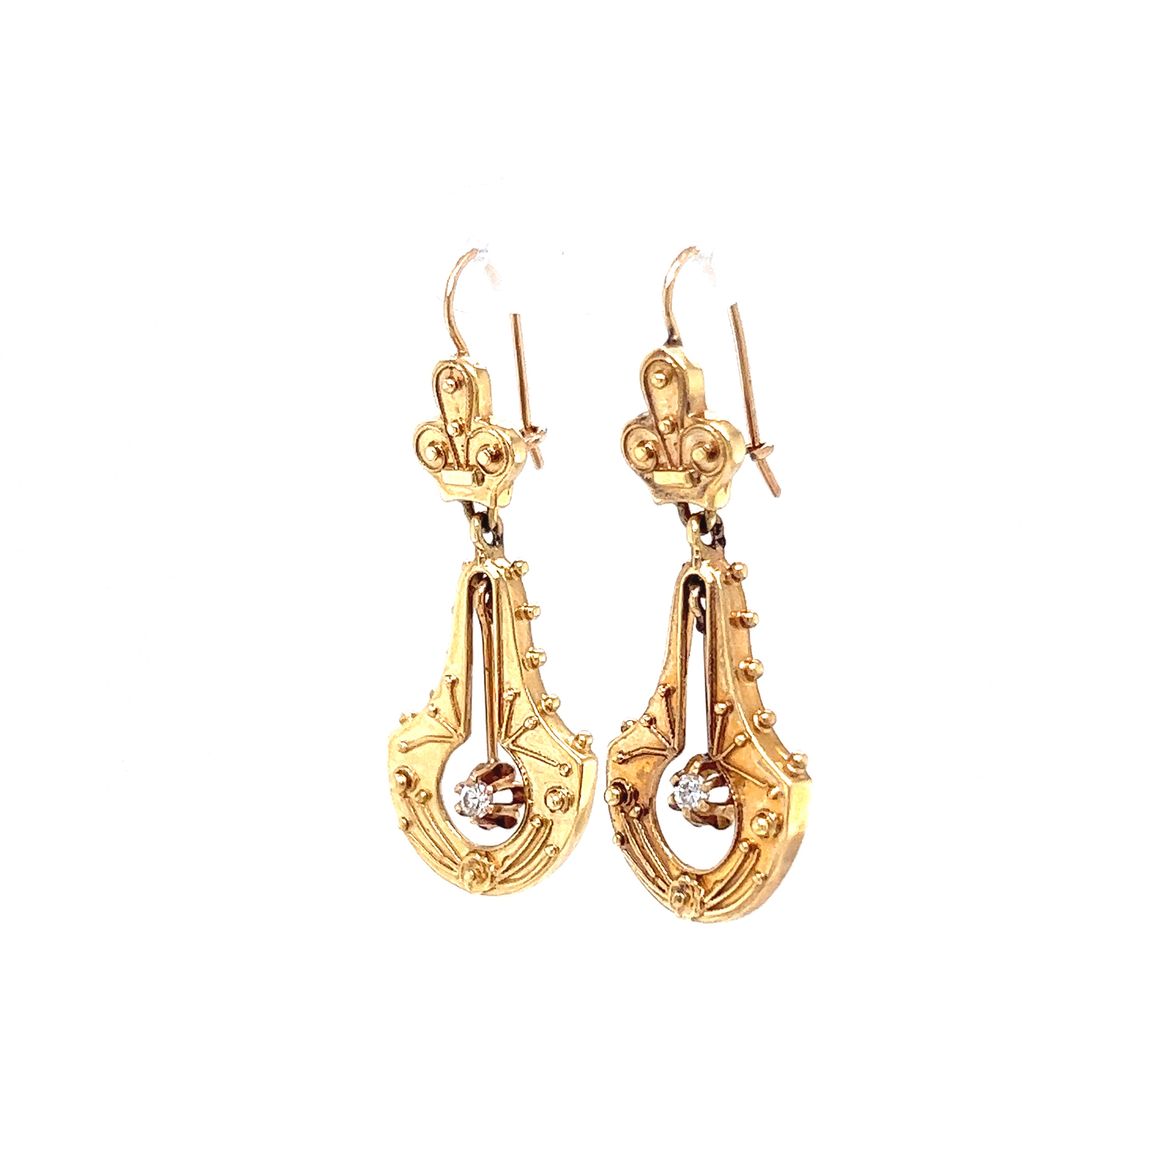 Antique Style Gold Earrings Studs - JD SOLITAIRE